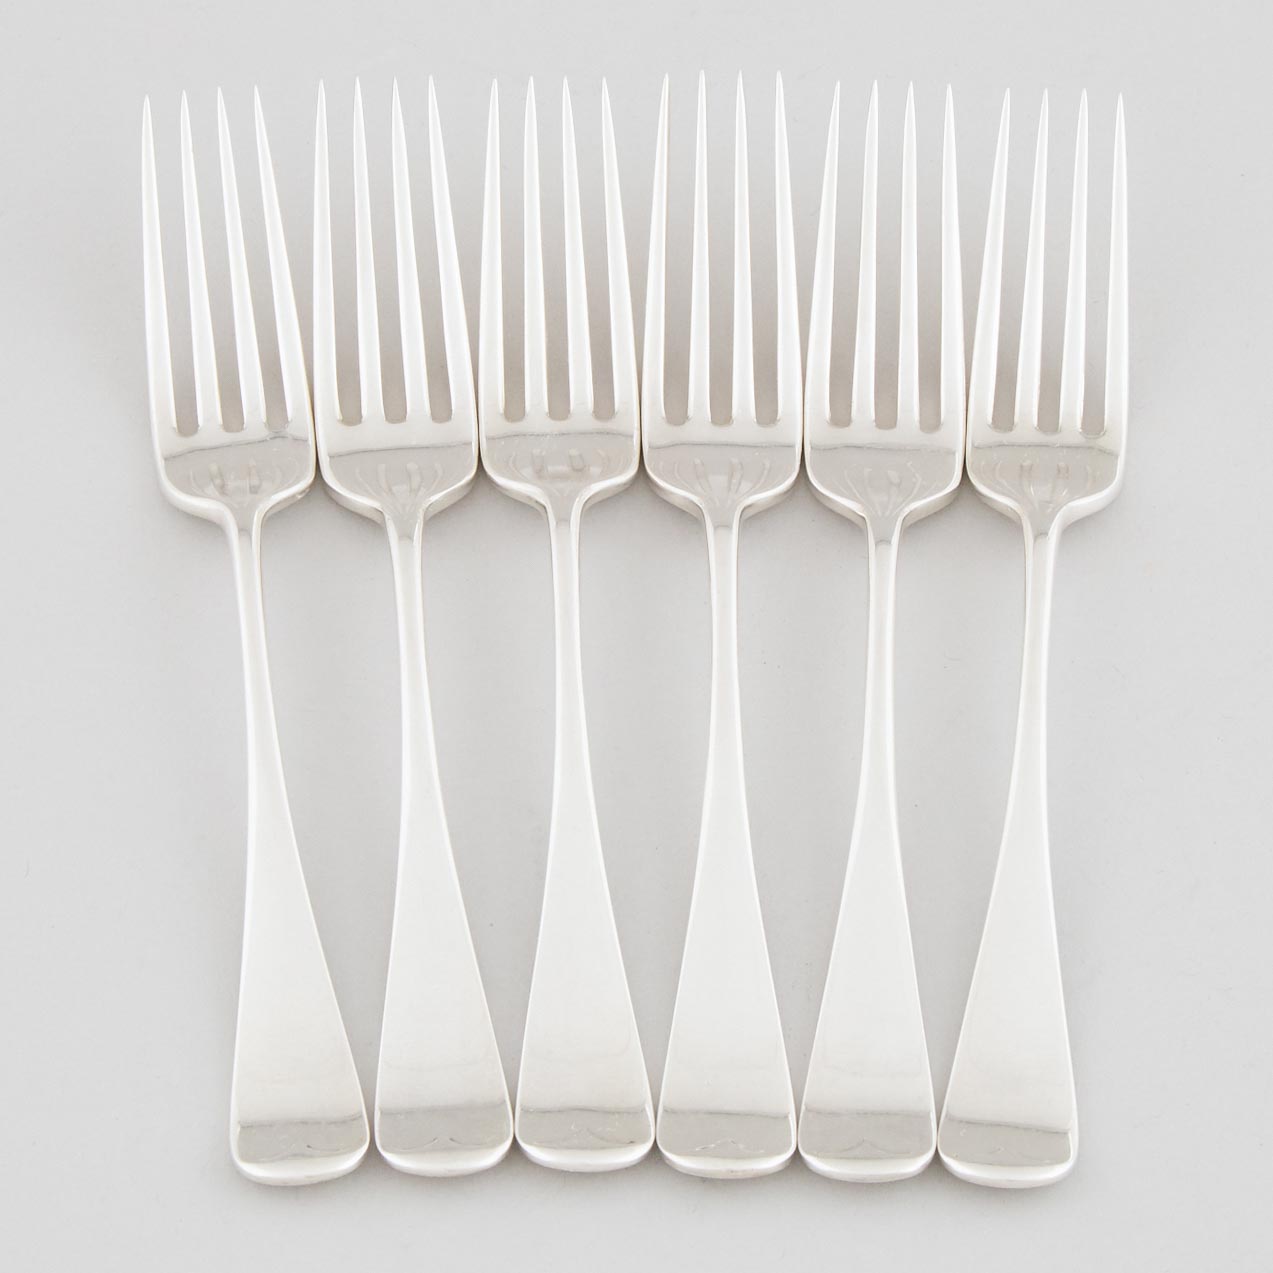 Six Canadian Silver 'Old English' Pattern Luncheon or Dessert Forks, Henry Birks & Sons, Montreal, Que., 20th century